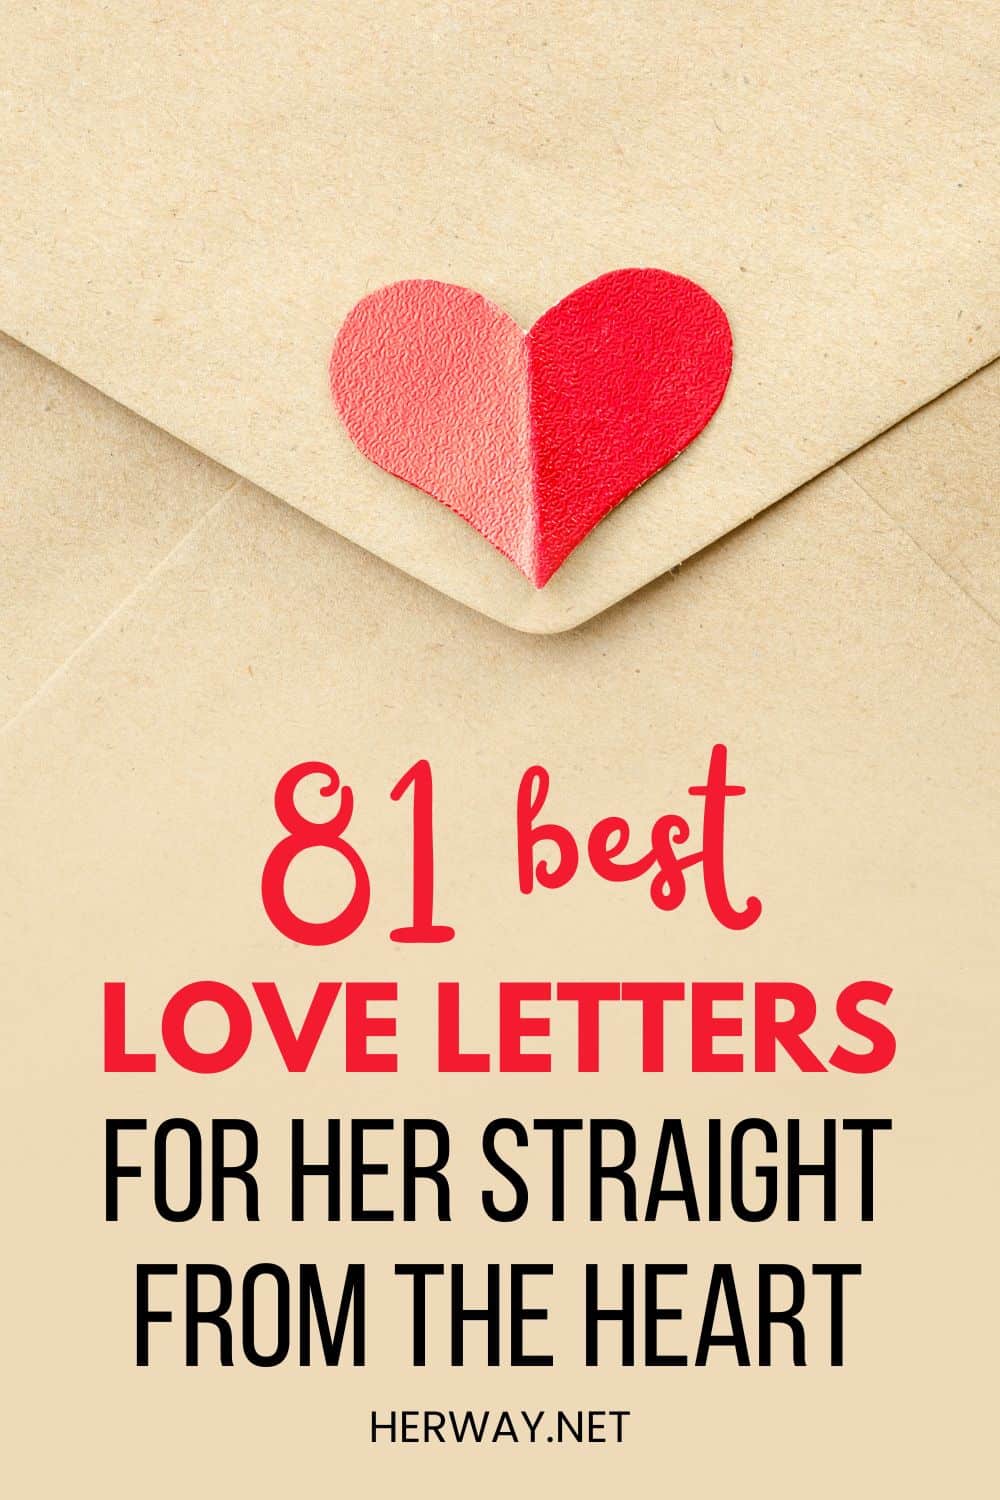 81 Best Love Letters For Her Straight From The Heart Pinterest